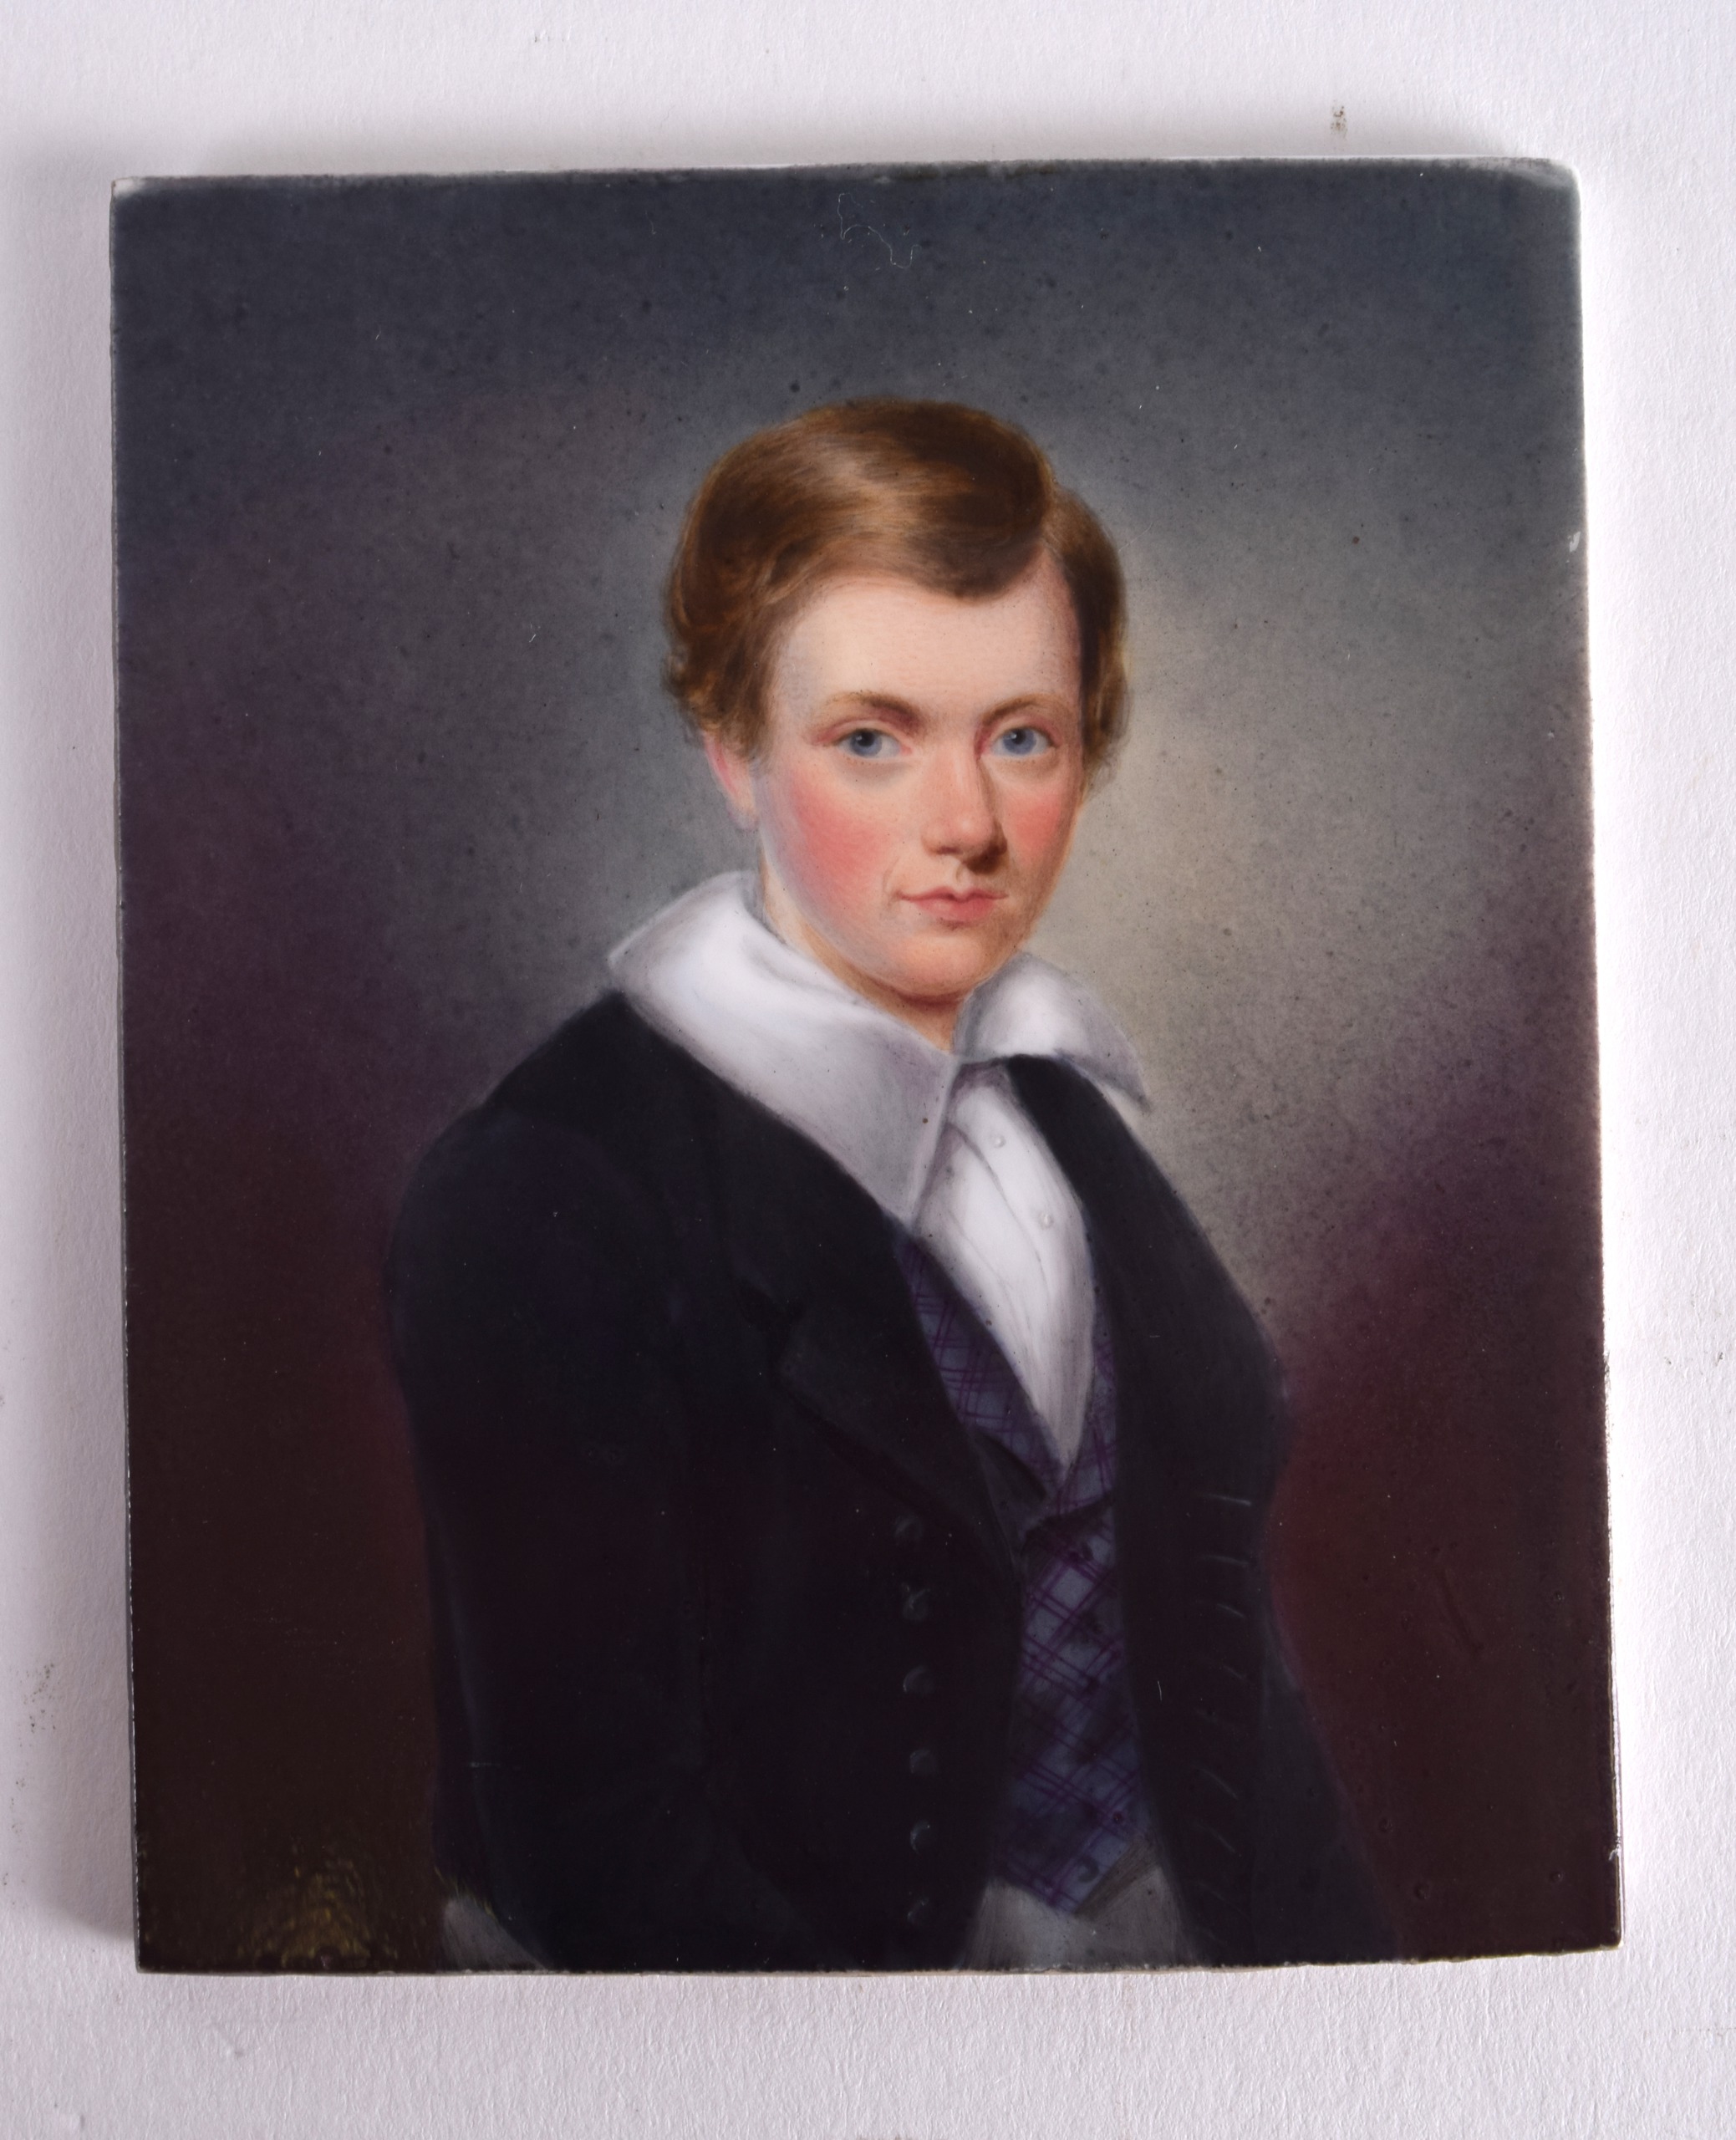 A MID 19TH CENTURY ENGLISH PORCELAIN PAINTED PLAQUE by John Simpson C1844, depicting a young boy